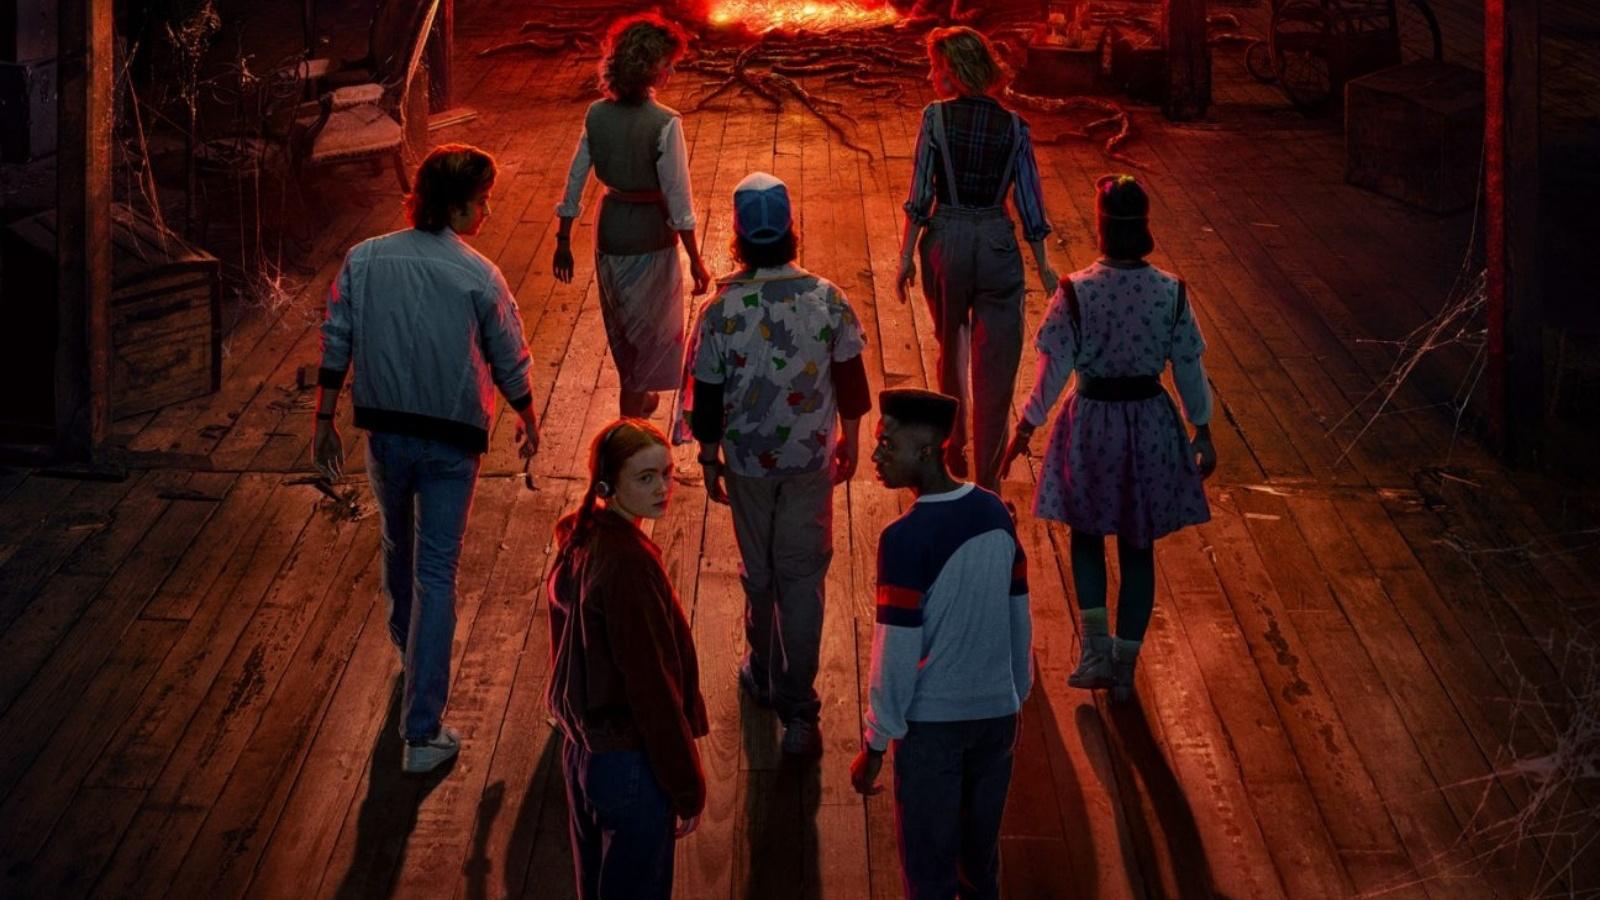 There's A Stranger Things Theory Which Connects The Characters Who